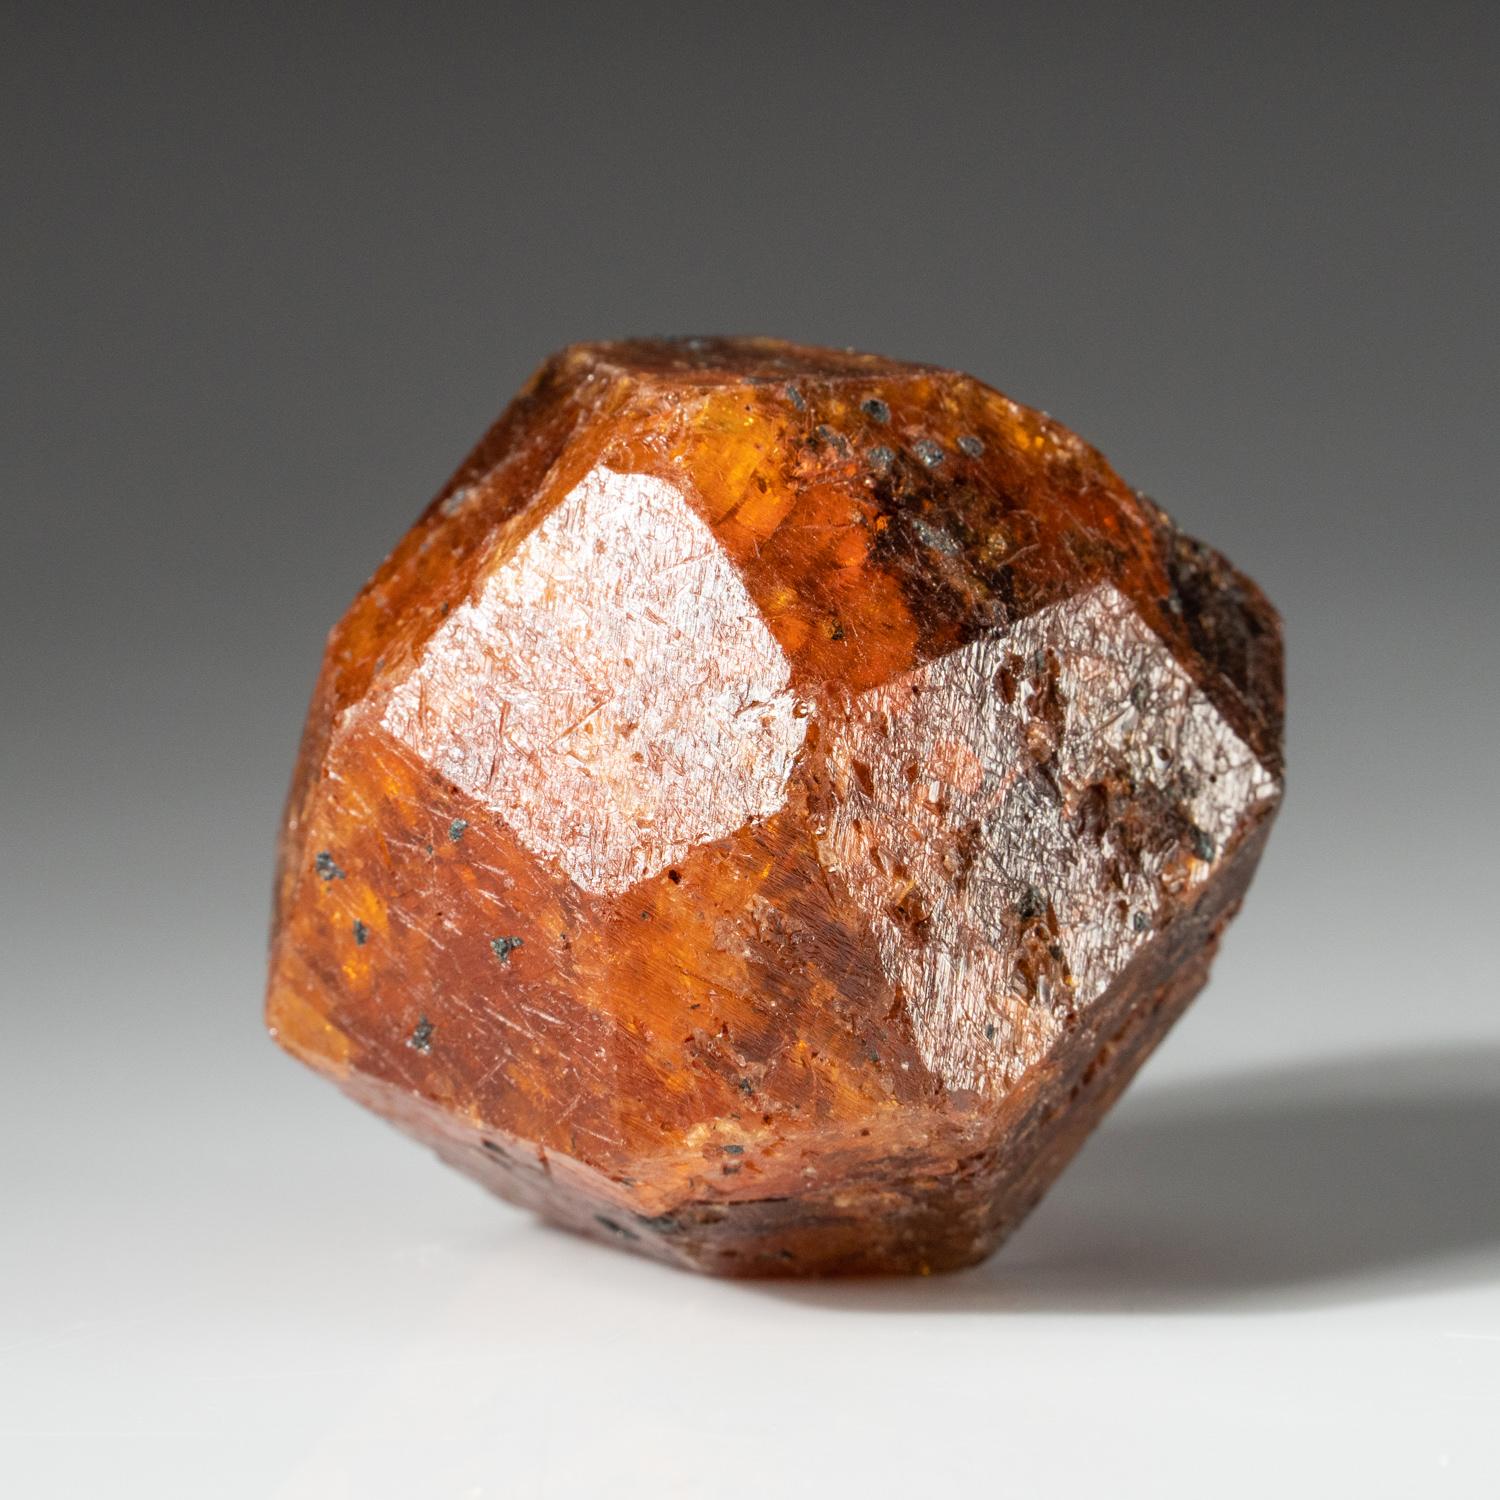 From Nani Hill, Loliondo, Ngorongoro district, Arusha, Tanzania Large trapezohedral crystal of transparent orange spessartine garnet with no matrix attached. Has lustrous faces with well defined edges. 176 grams, 1.75 x 2 x 2 inches It's a beautiful